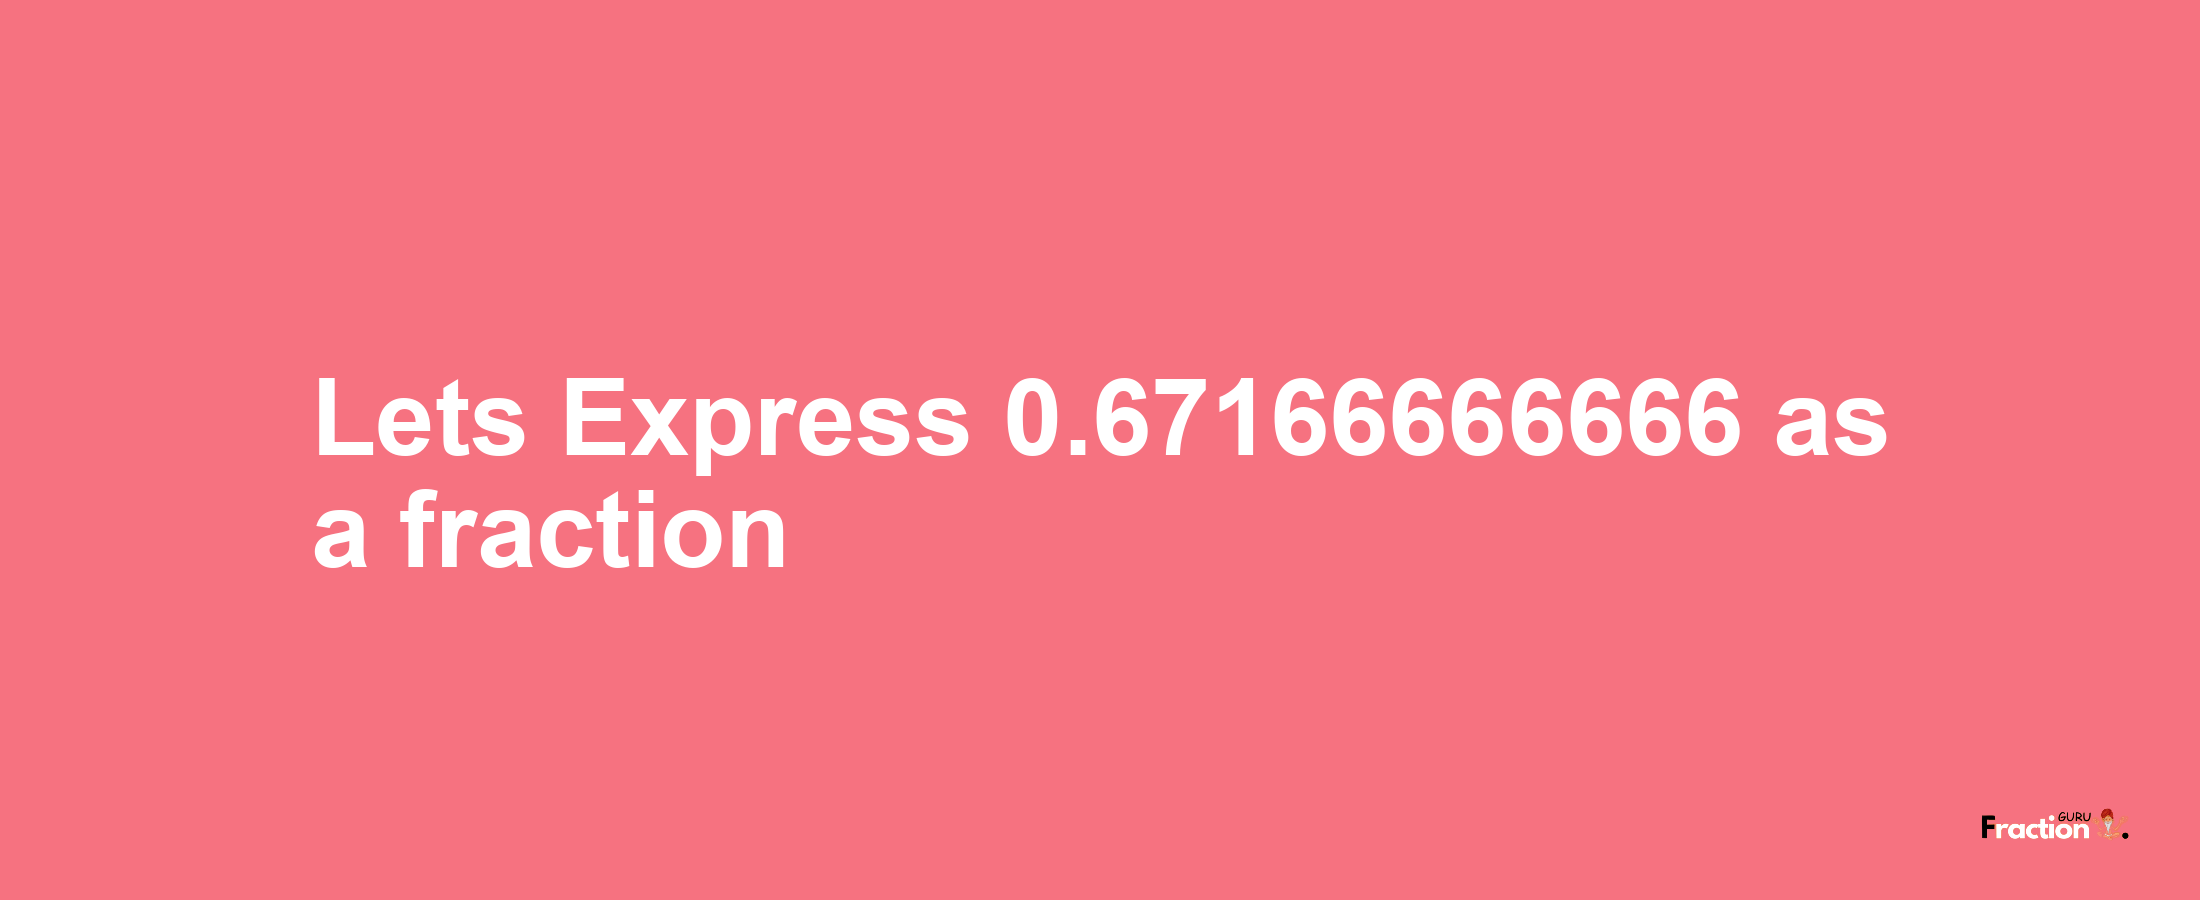 Lets Express 0.67166666666 as afraction